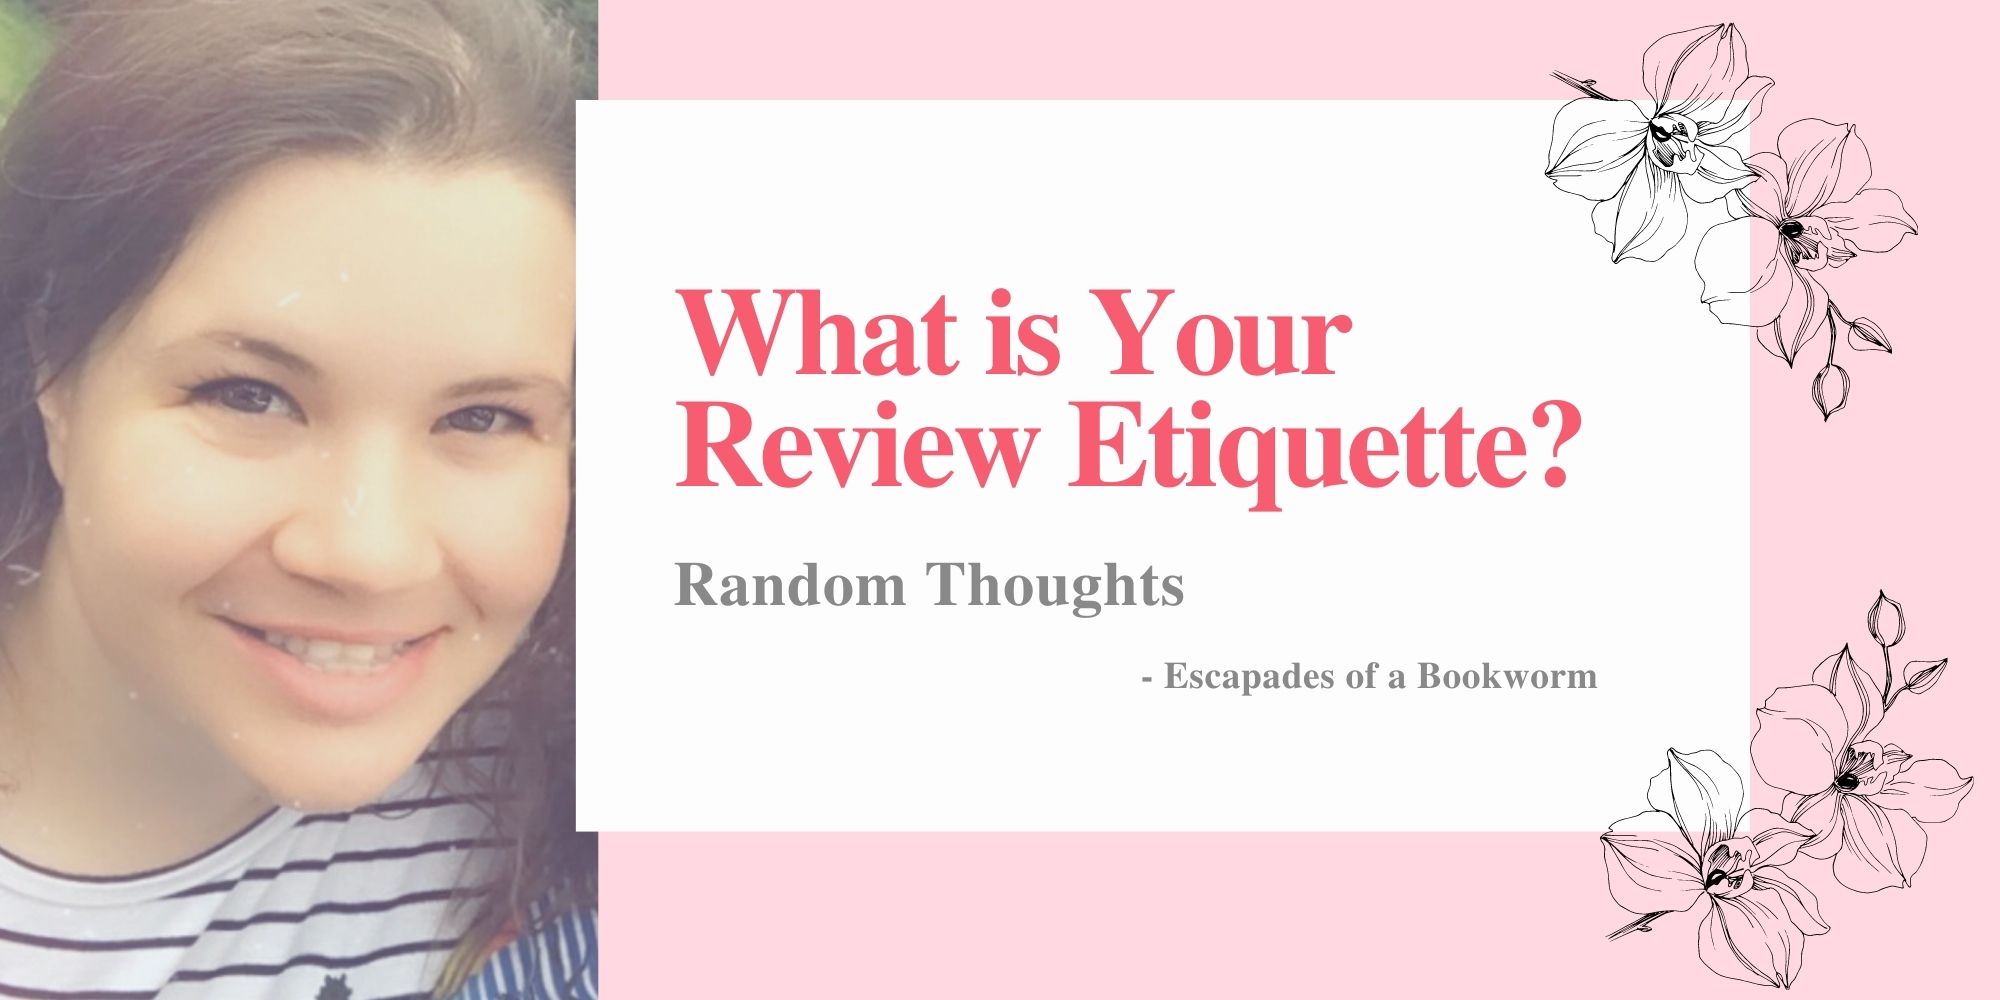 Random ThoughtsWhat is Your Review Etiquette?